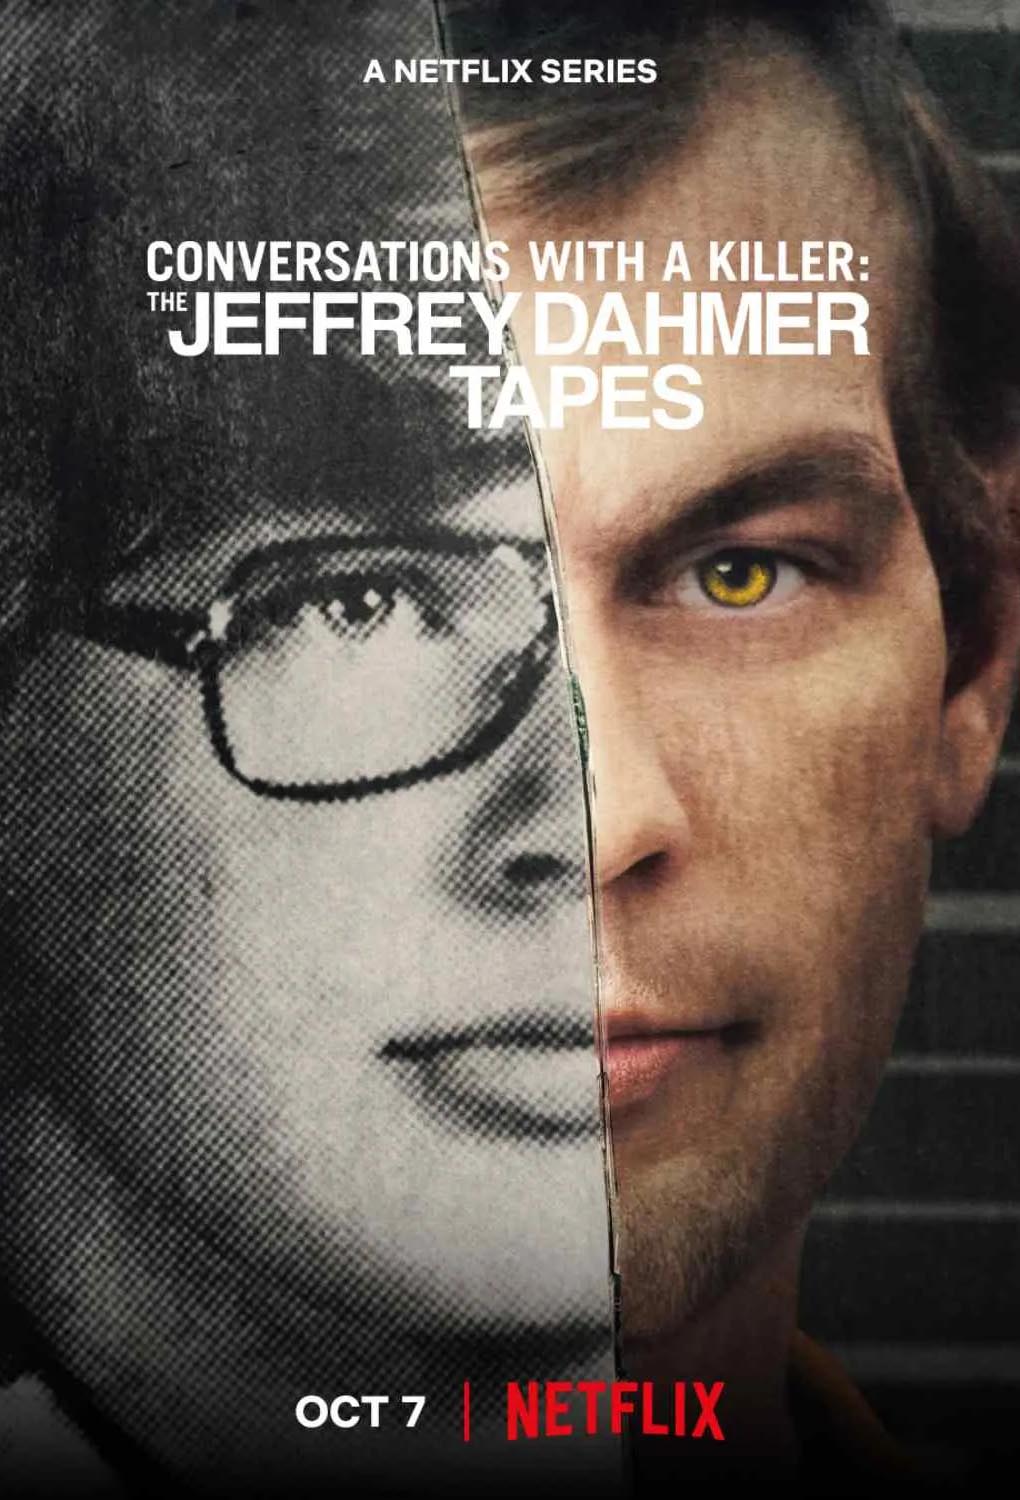 Conversations with a Killer: The Jeffrey Dahmer Tapes Season 1 Episode 3